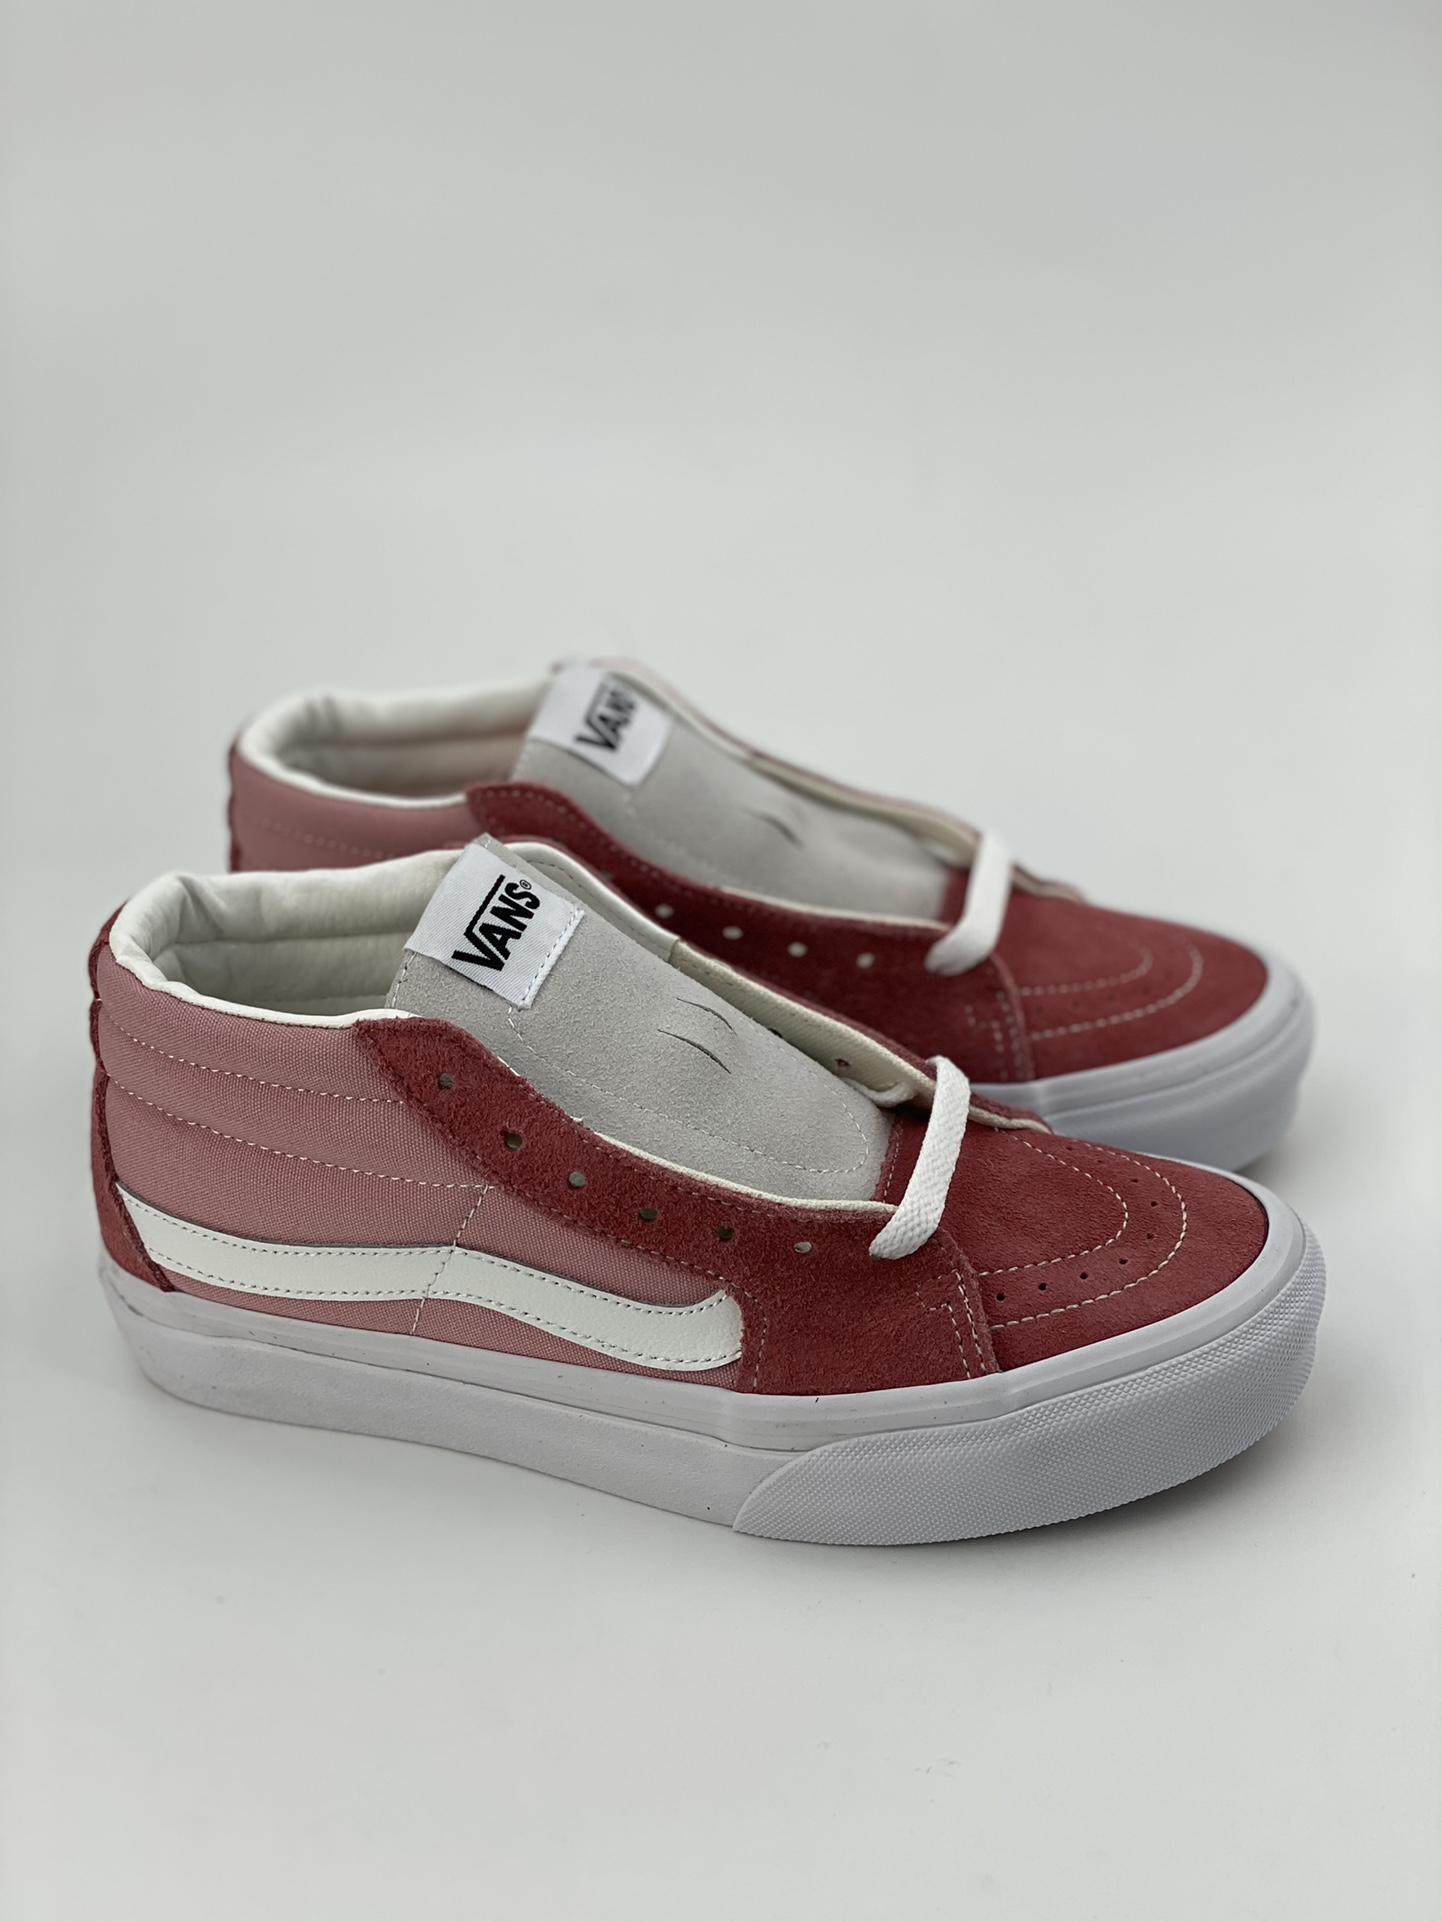 Vans Sk8-Mid mid-top contrasting color stitching sneakers